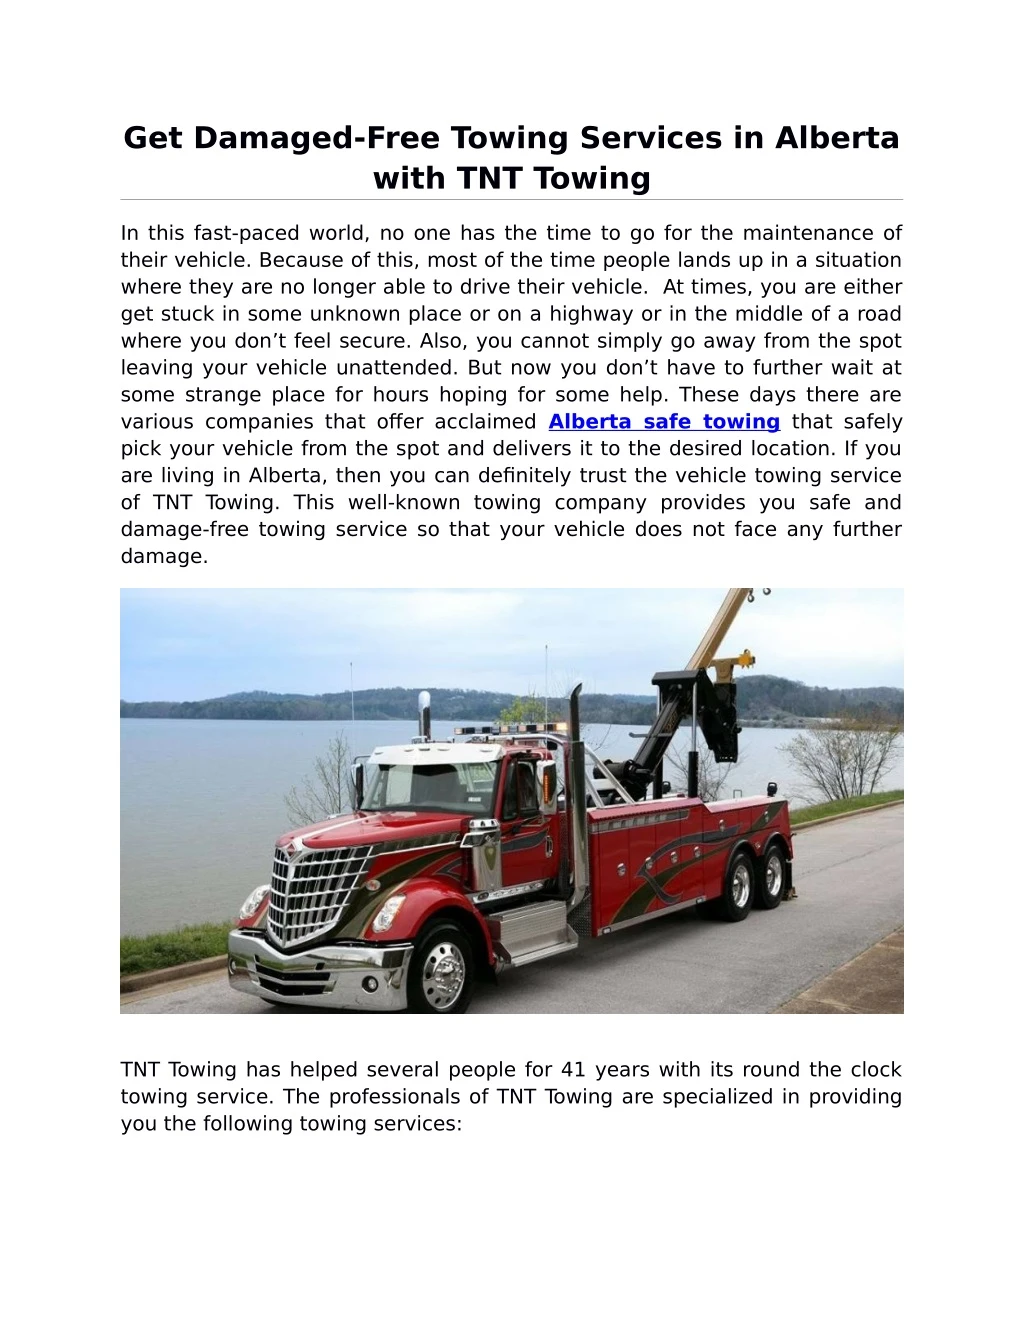 get damaged free towing services in alberta with